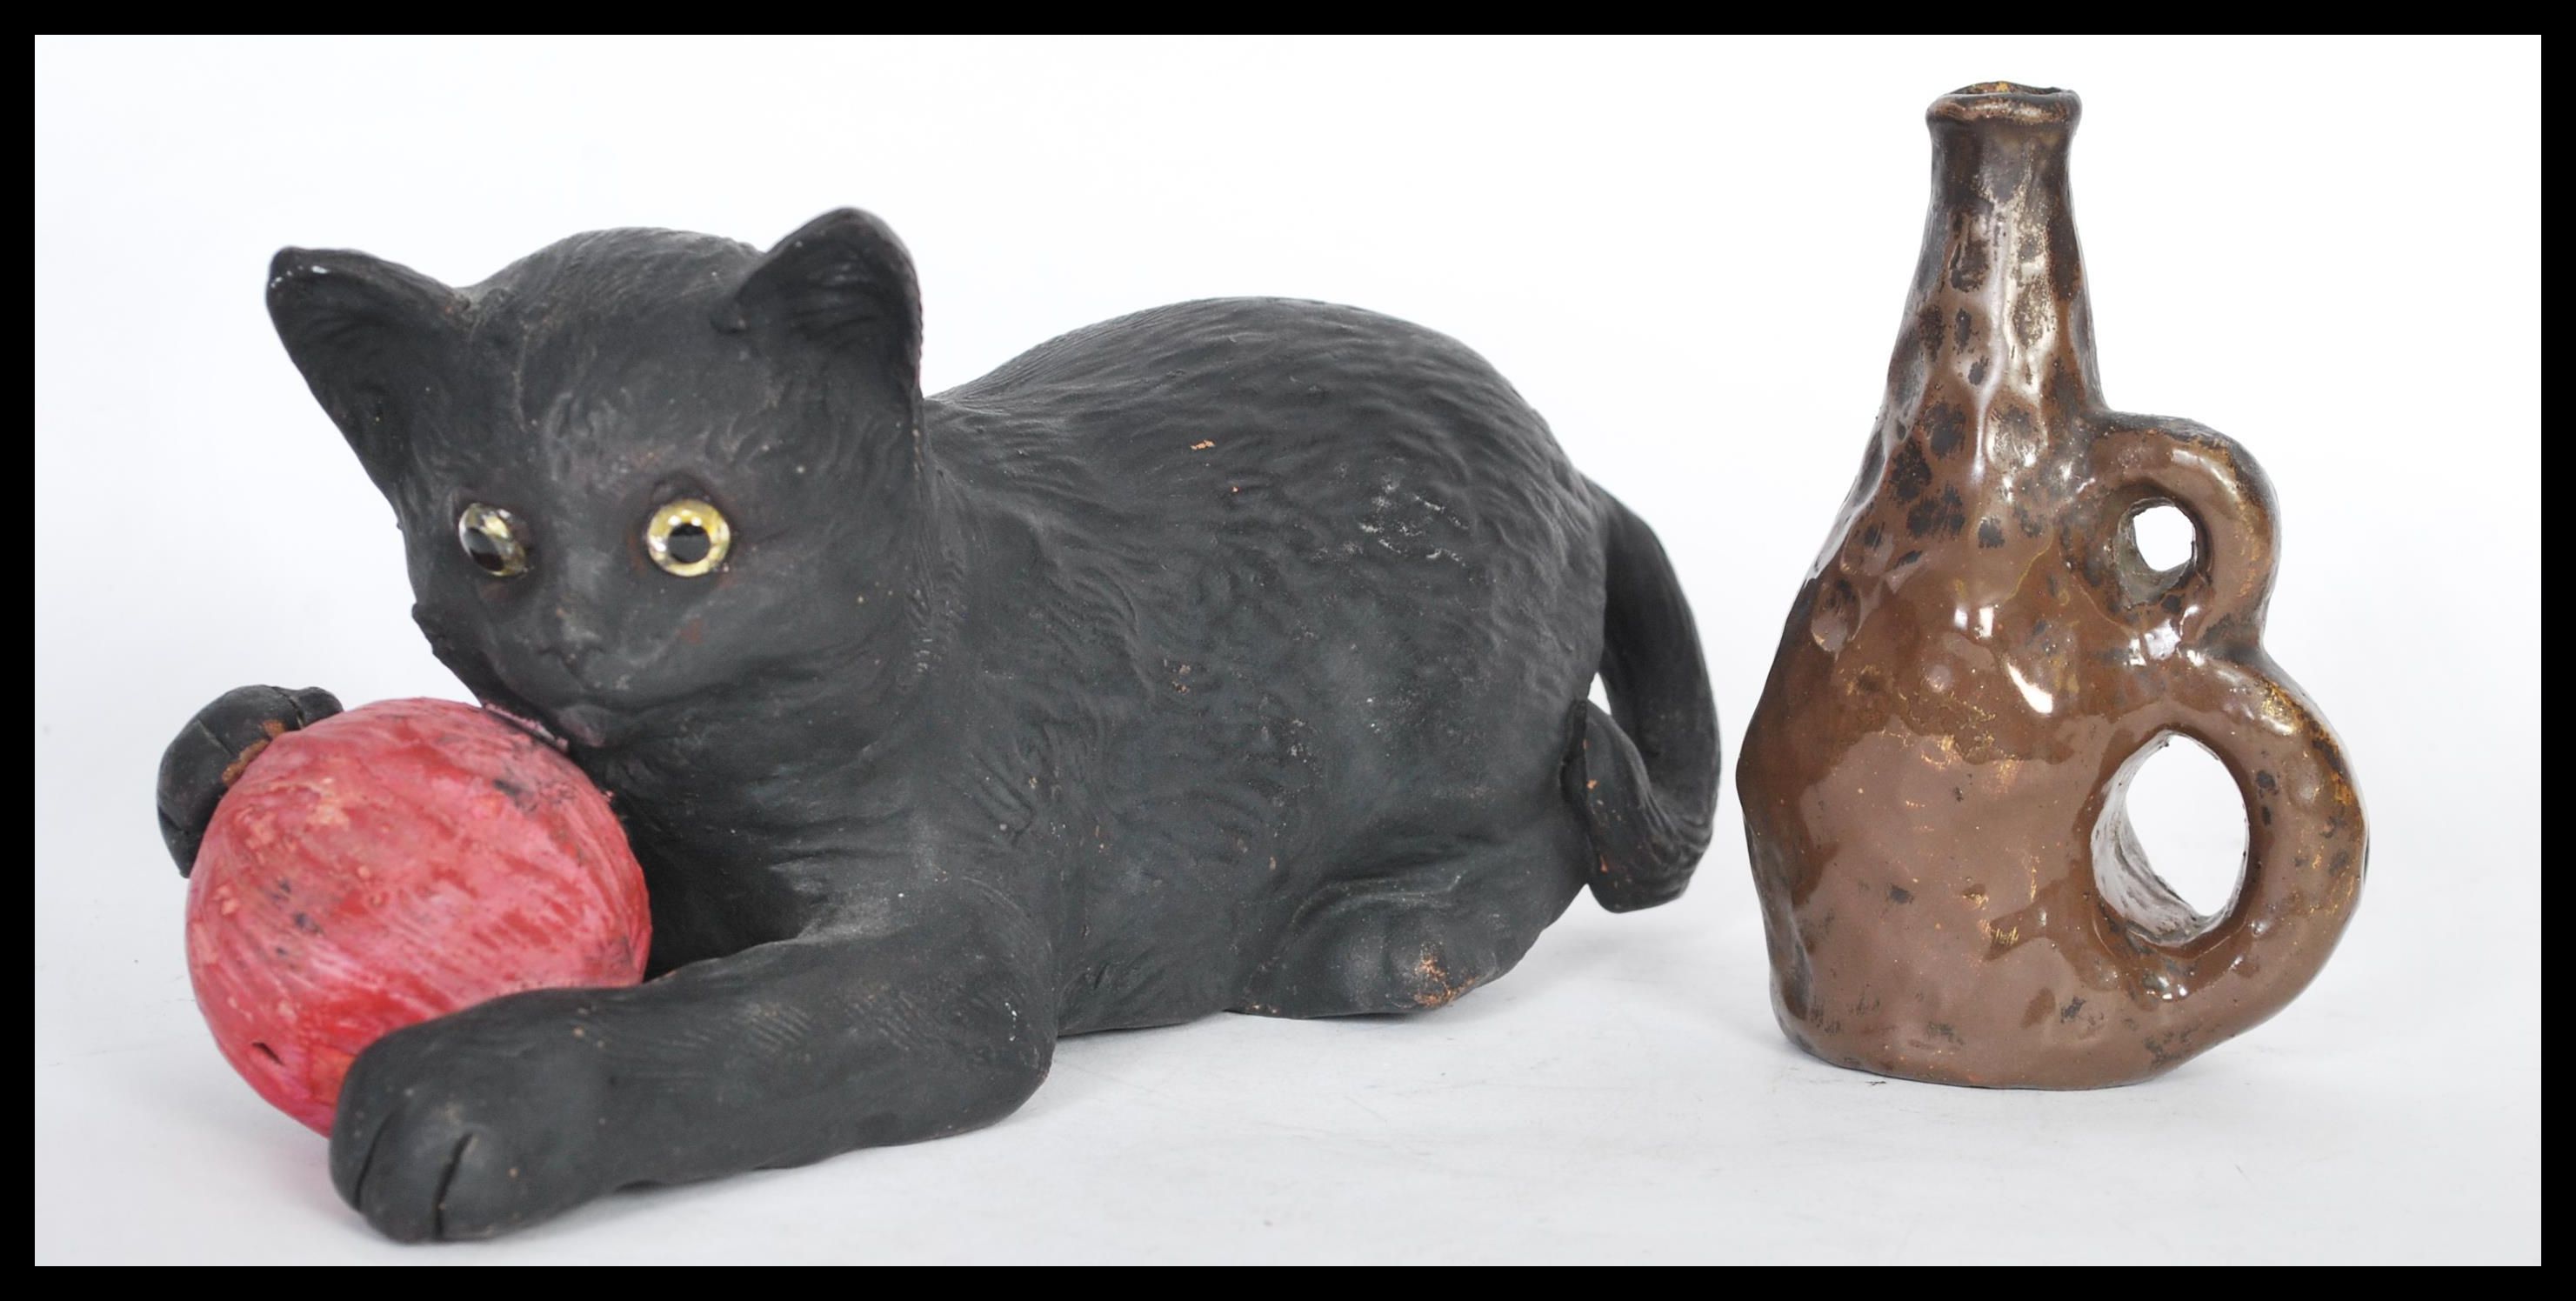 A Bretby figurine in the form of a cat with a ball of pink yarn no. 1618 and a smaller art pottery